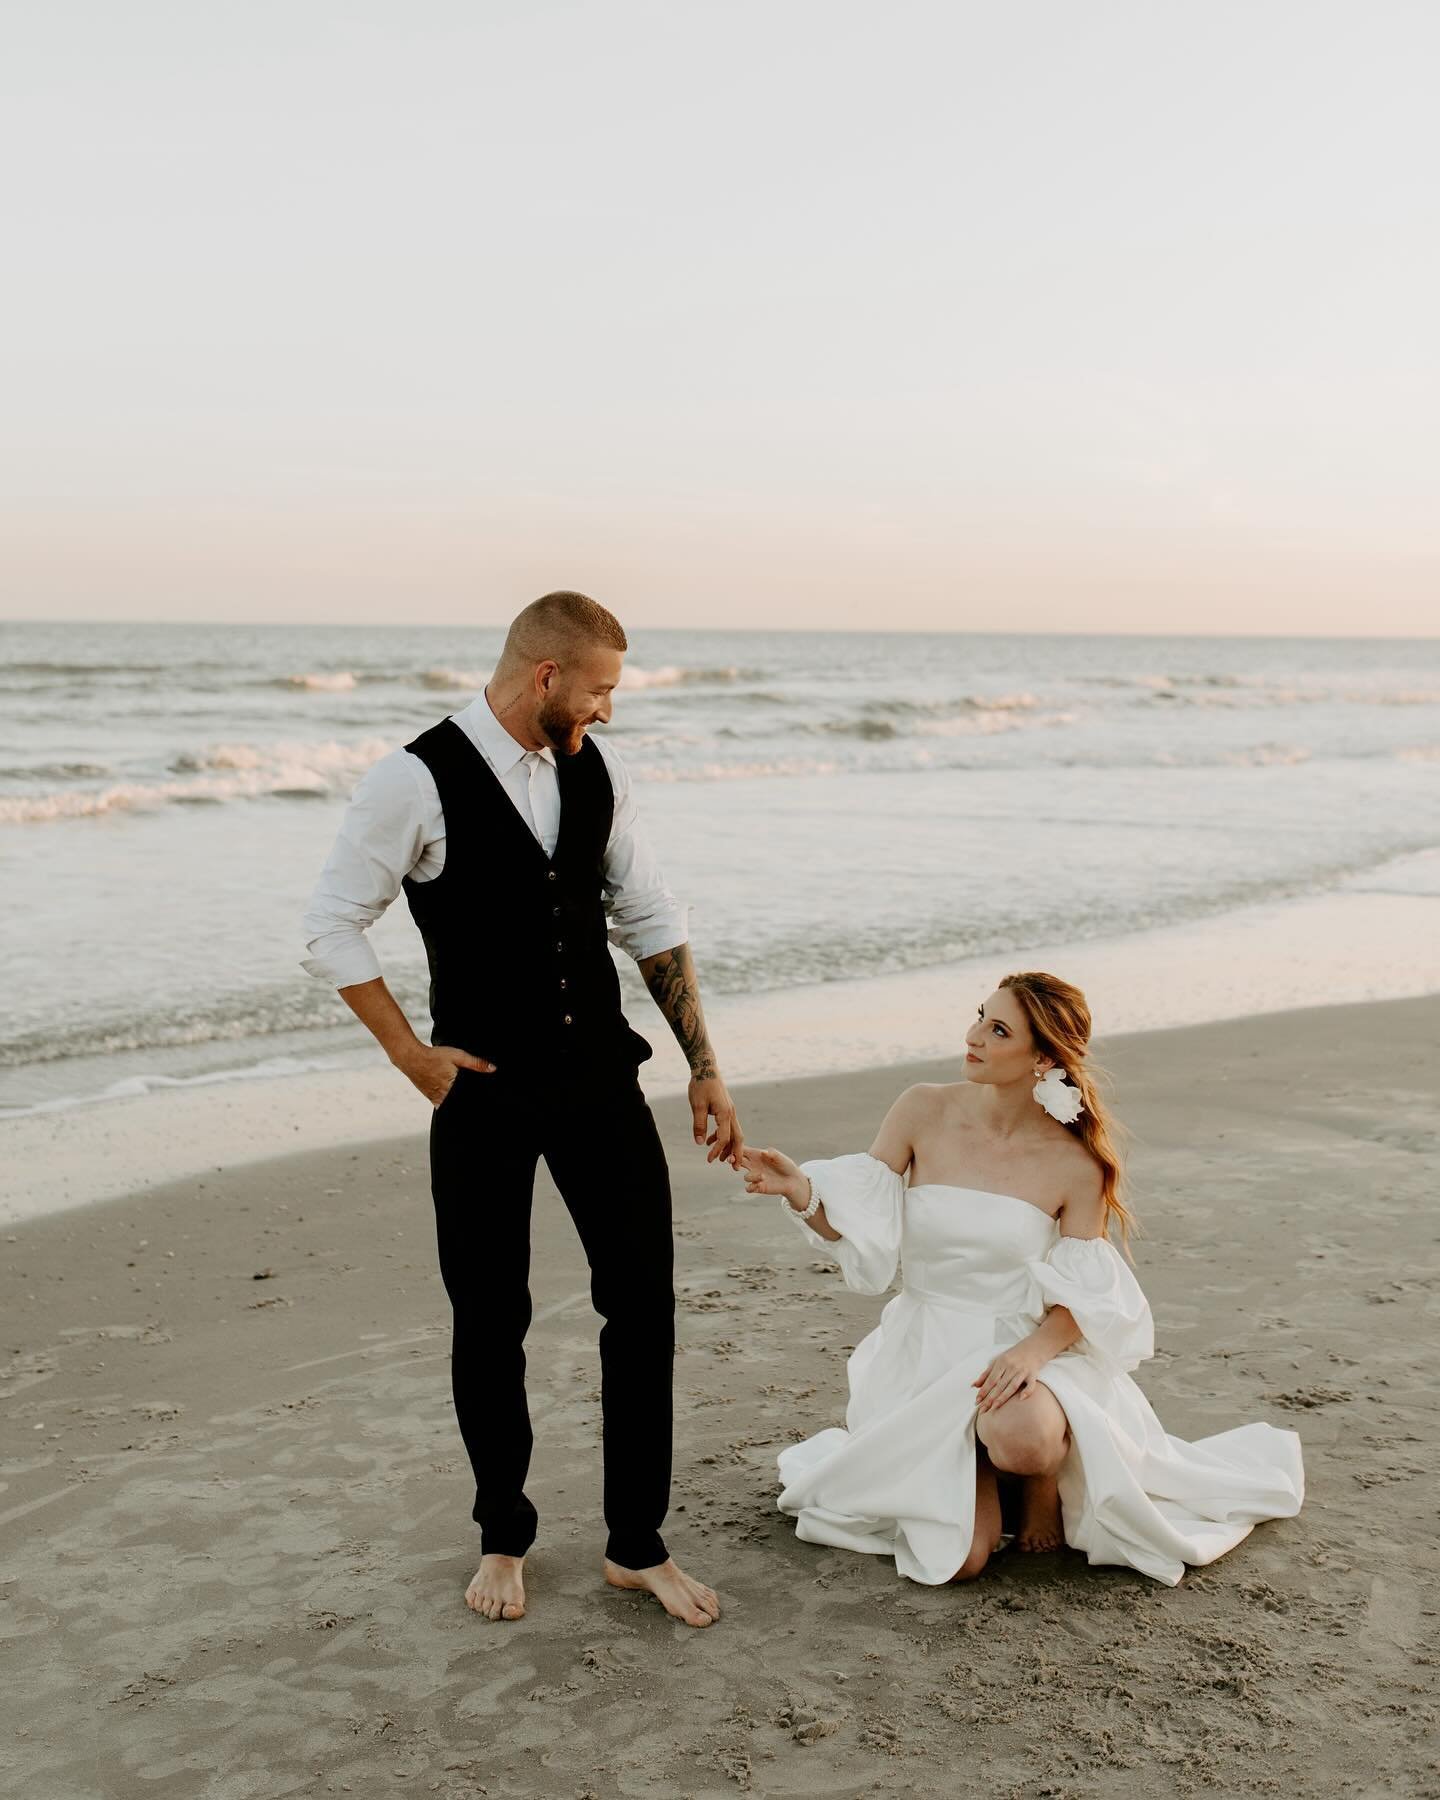 Mentally on a beach somewhere✨ I need to make beach sessions a thing this summer. Who&rsquo;s in?⁣
⁣
#beach #beachphotography #beachphotoshoot #elopement #beachelopement #beachday #beachvibes #elopementlove #husband #wife #summer #summertime #summerv